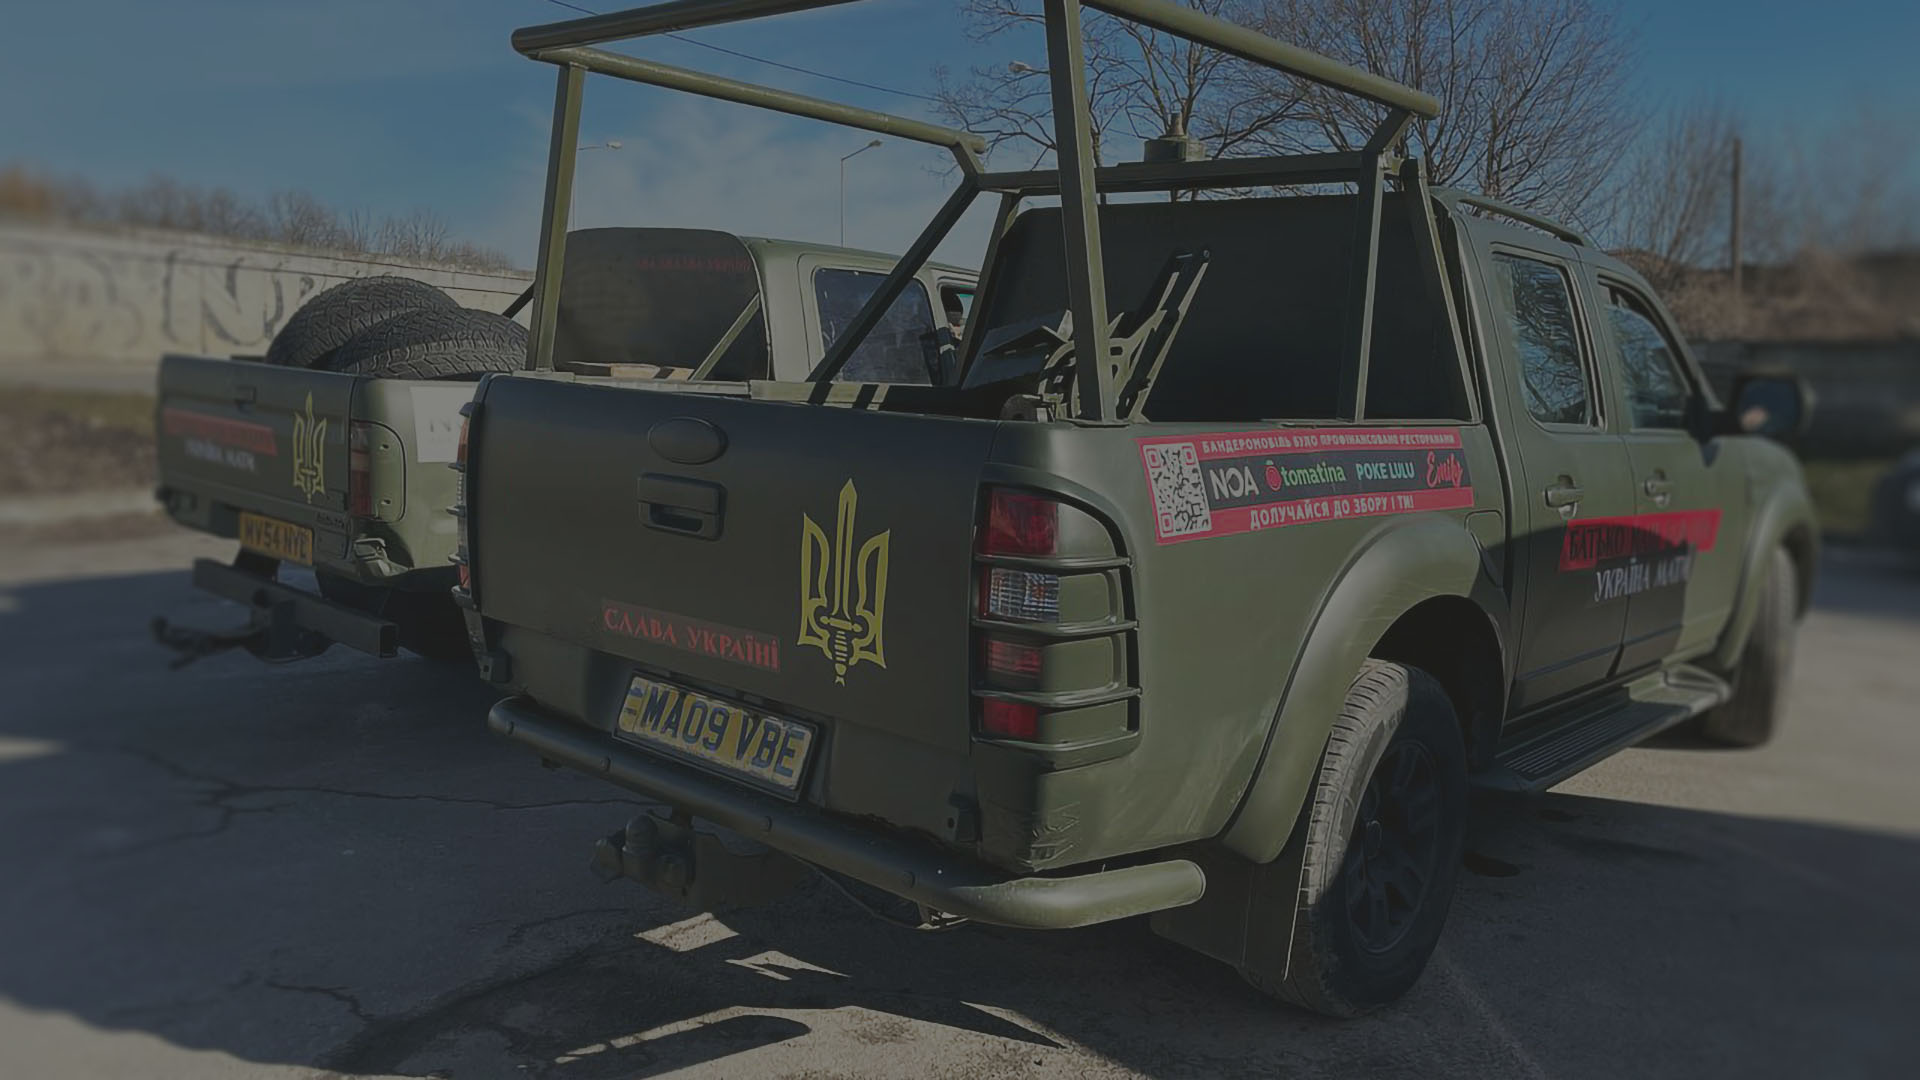 Two donated pickup trucks were painted, branded and filled with supplies for the Ukrainian army.